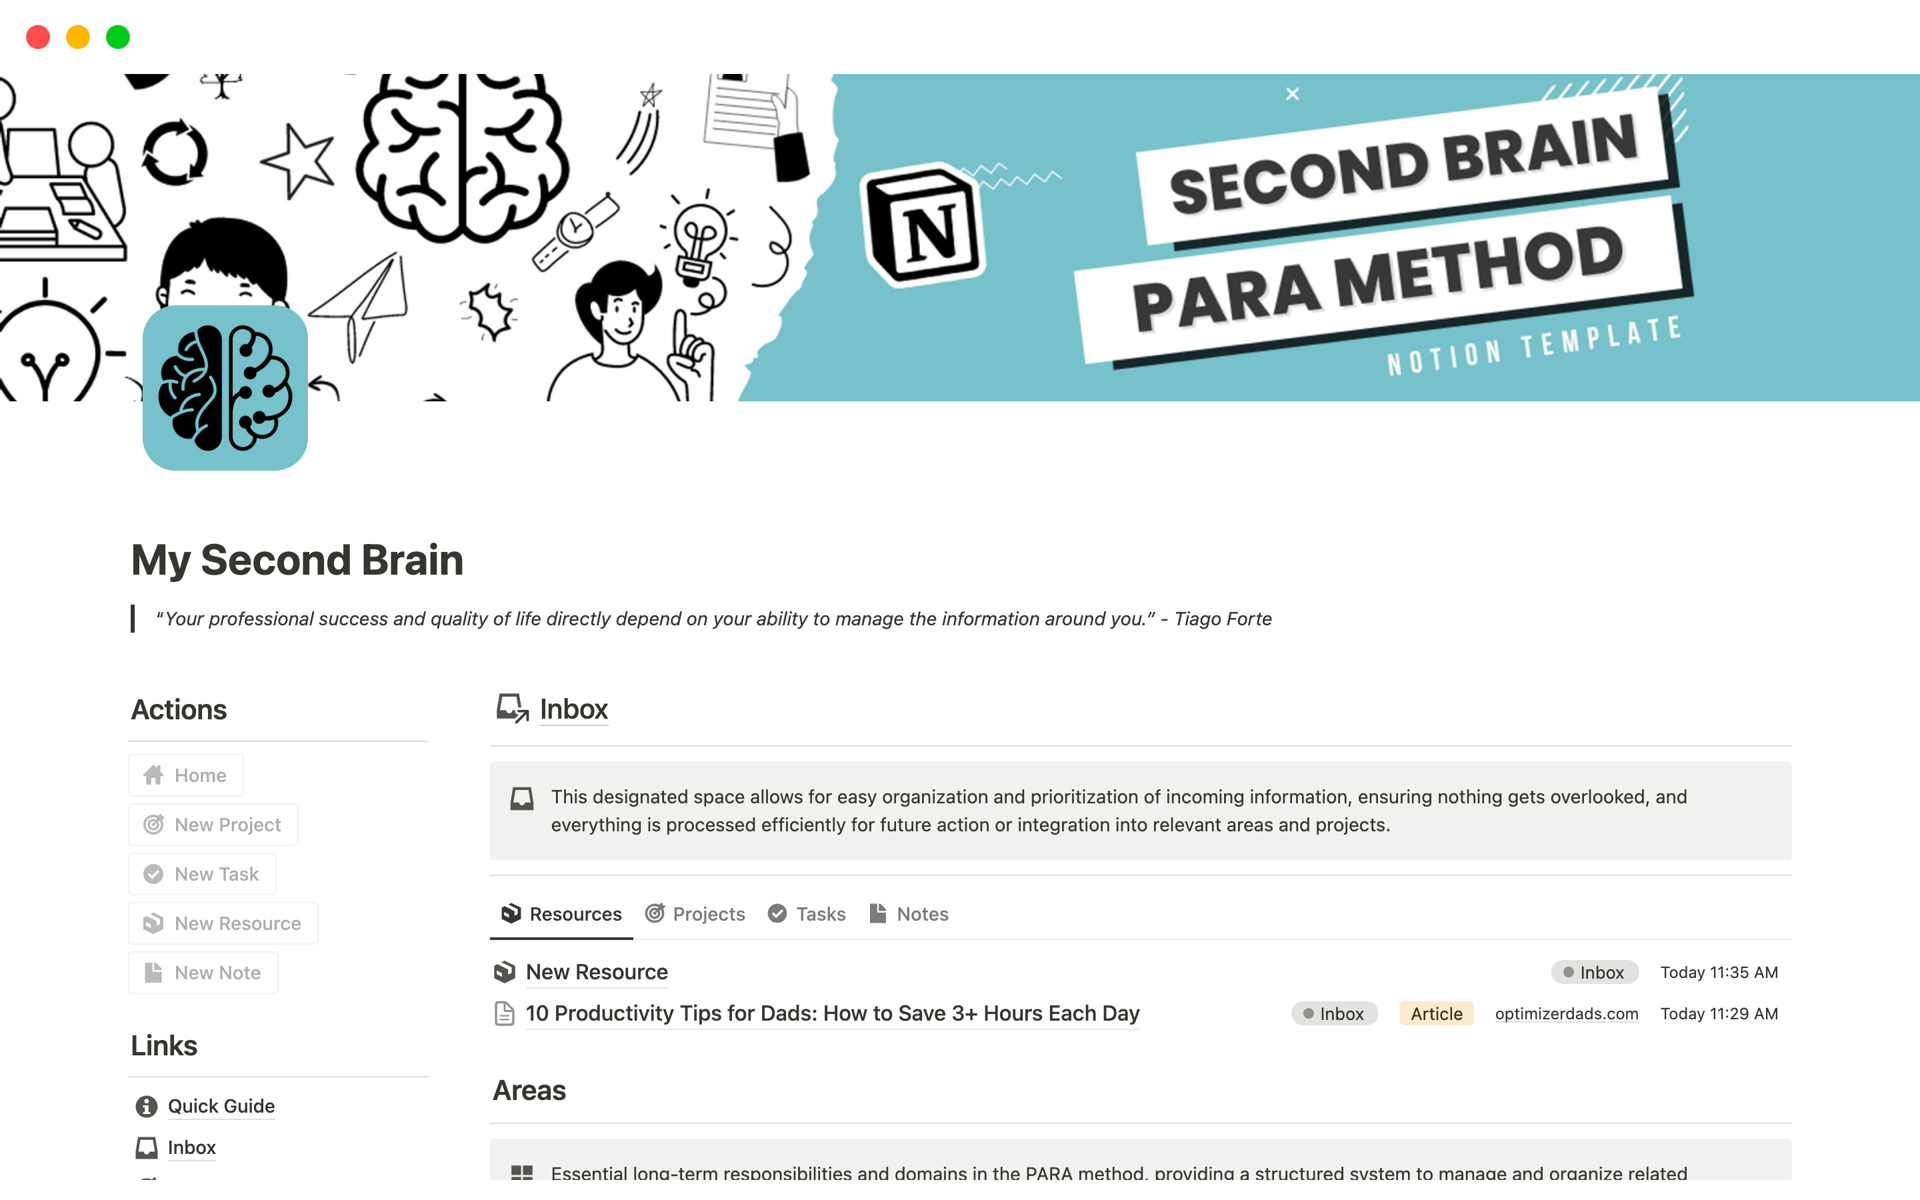 The "My Second Brain" Notion template streamlines tasks, projects, notes, and goals while offering bonus features for fitness tracking, gift planning, and shopping.